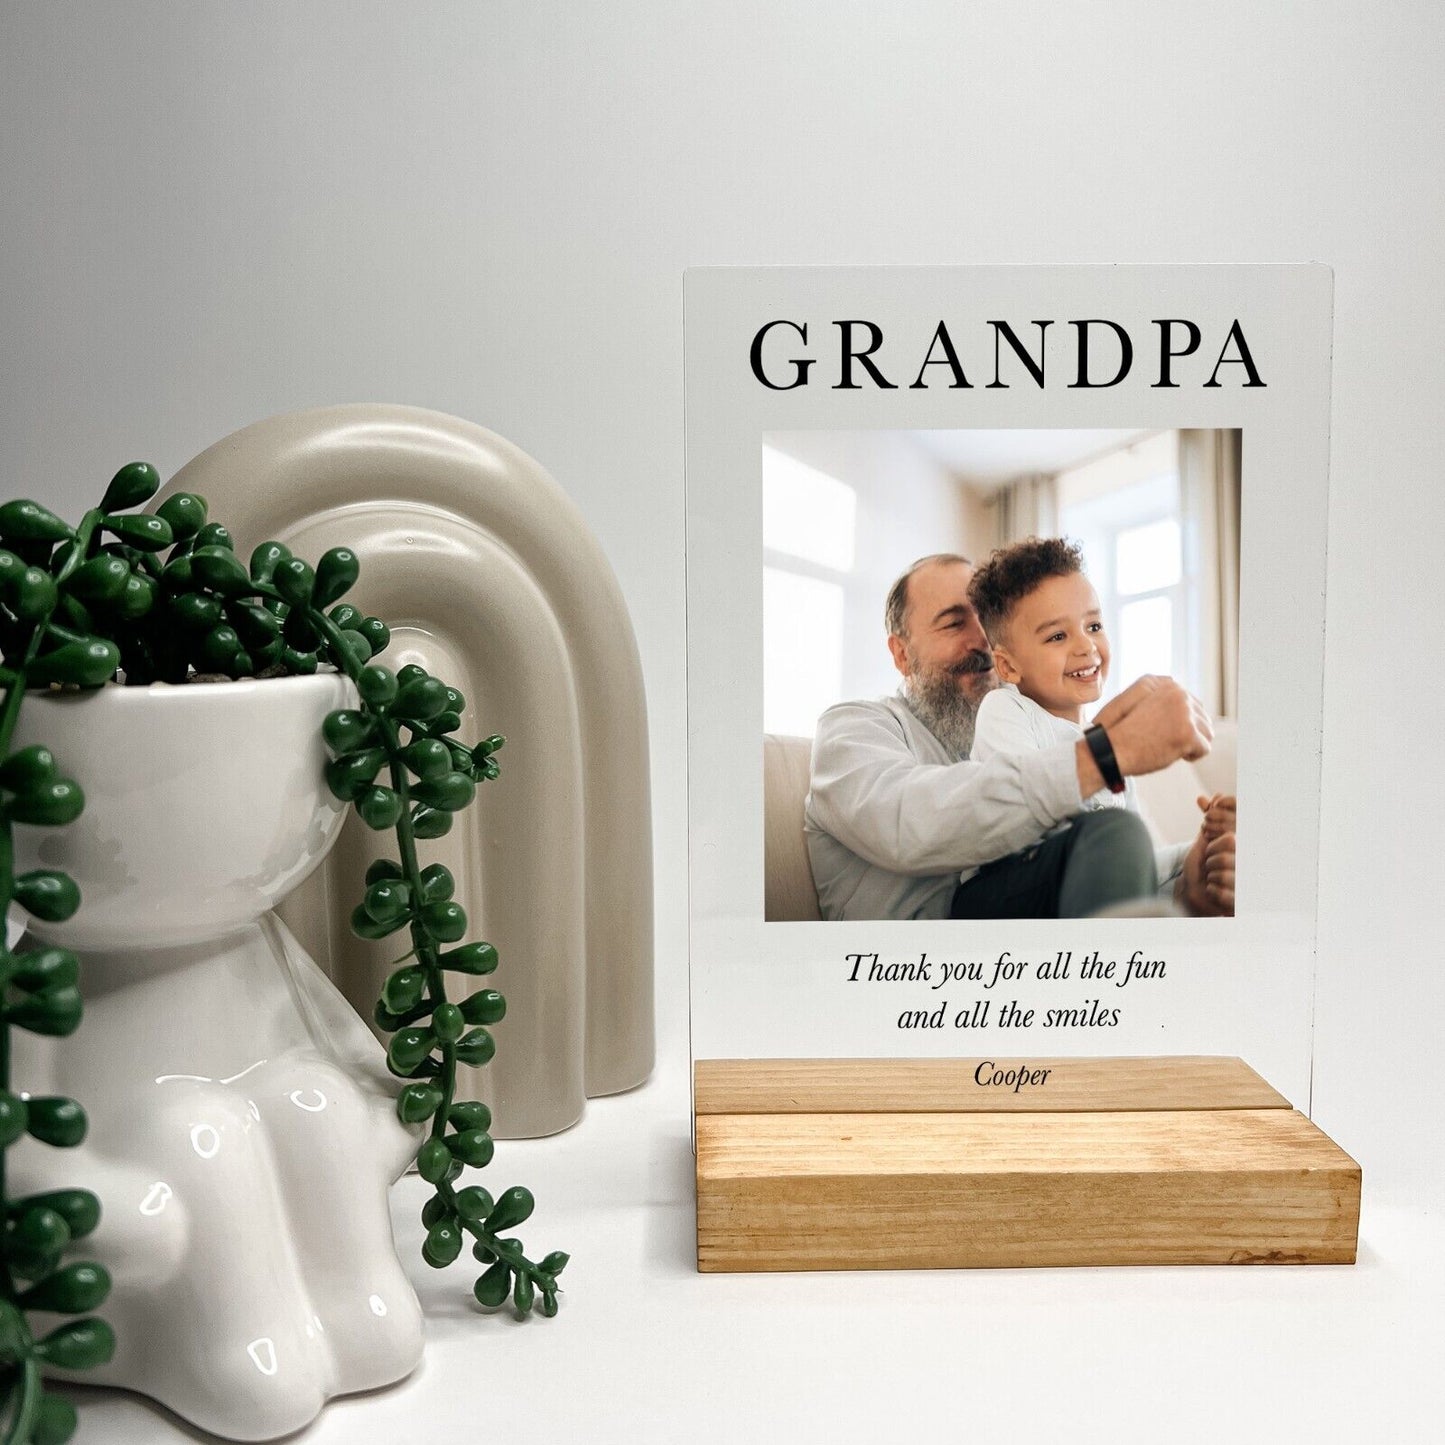 Personalized Wood Base Desk Table Stand Grandpa Love Grandfather Gramps Gift